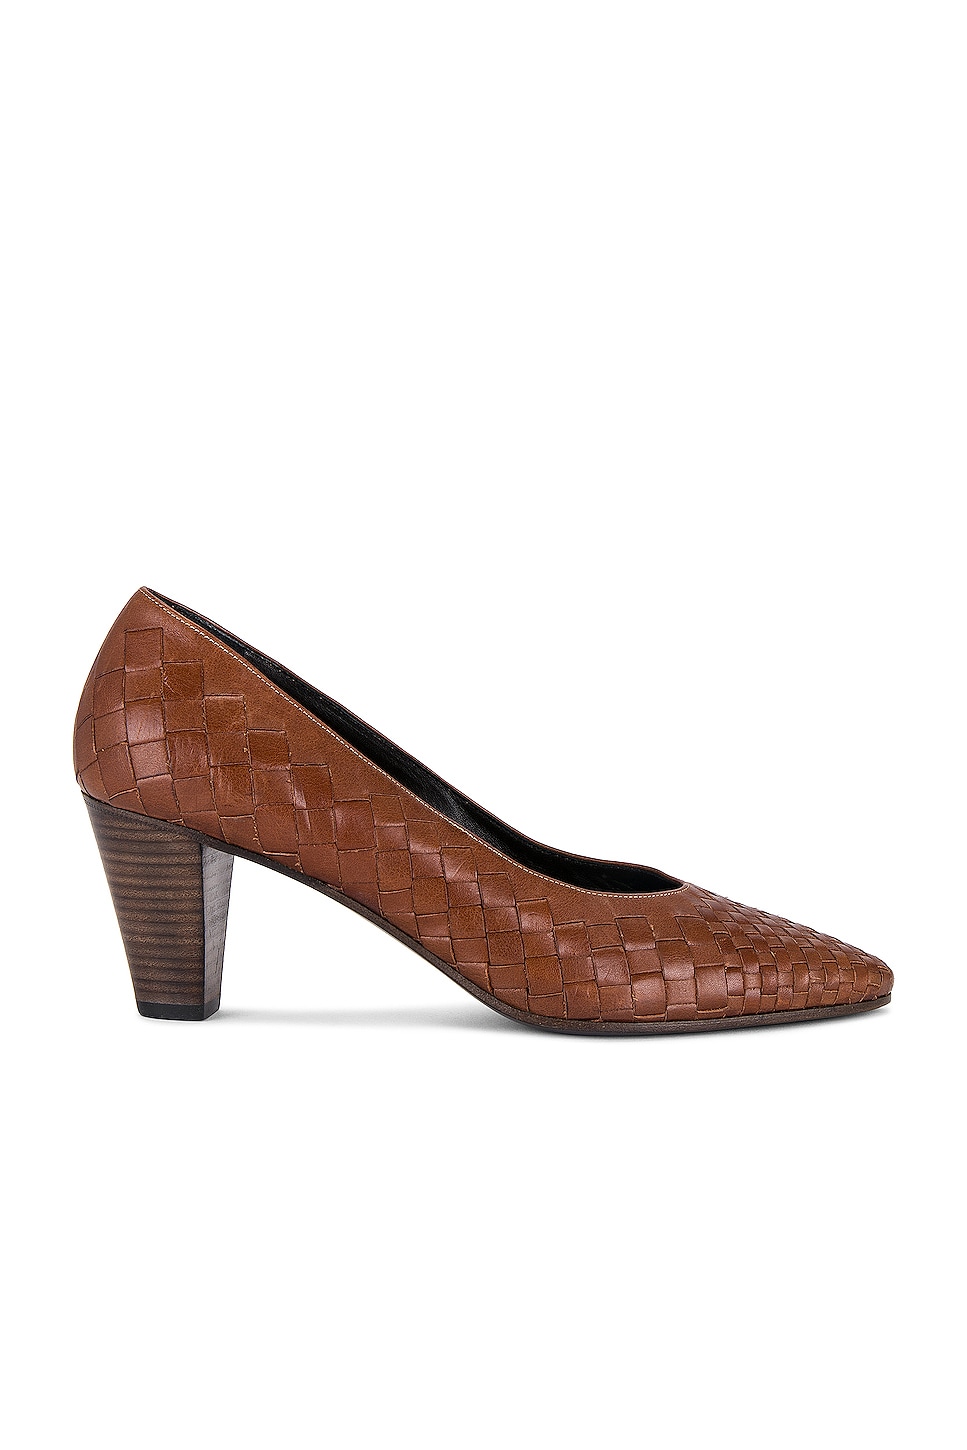 Image 1 of The Row Charlotte Pump in BROWN